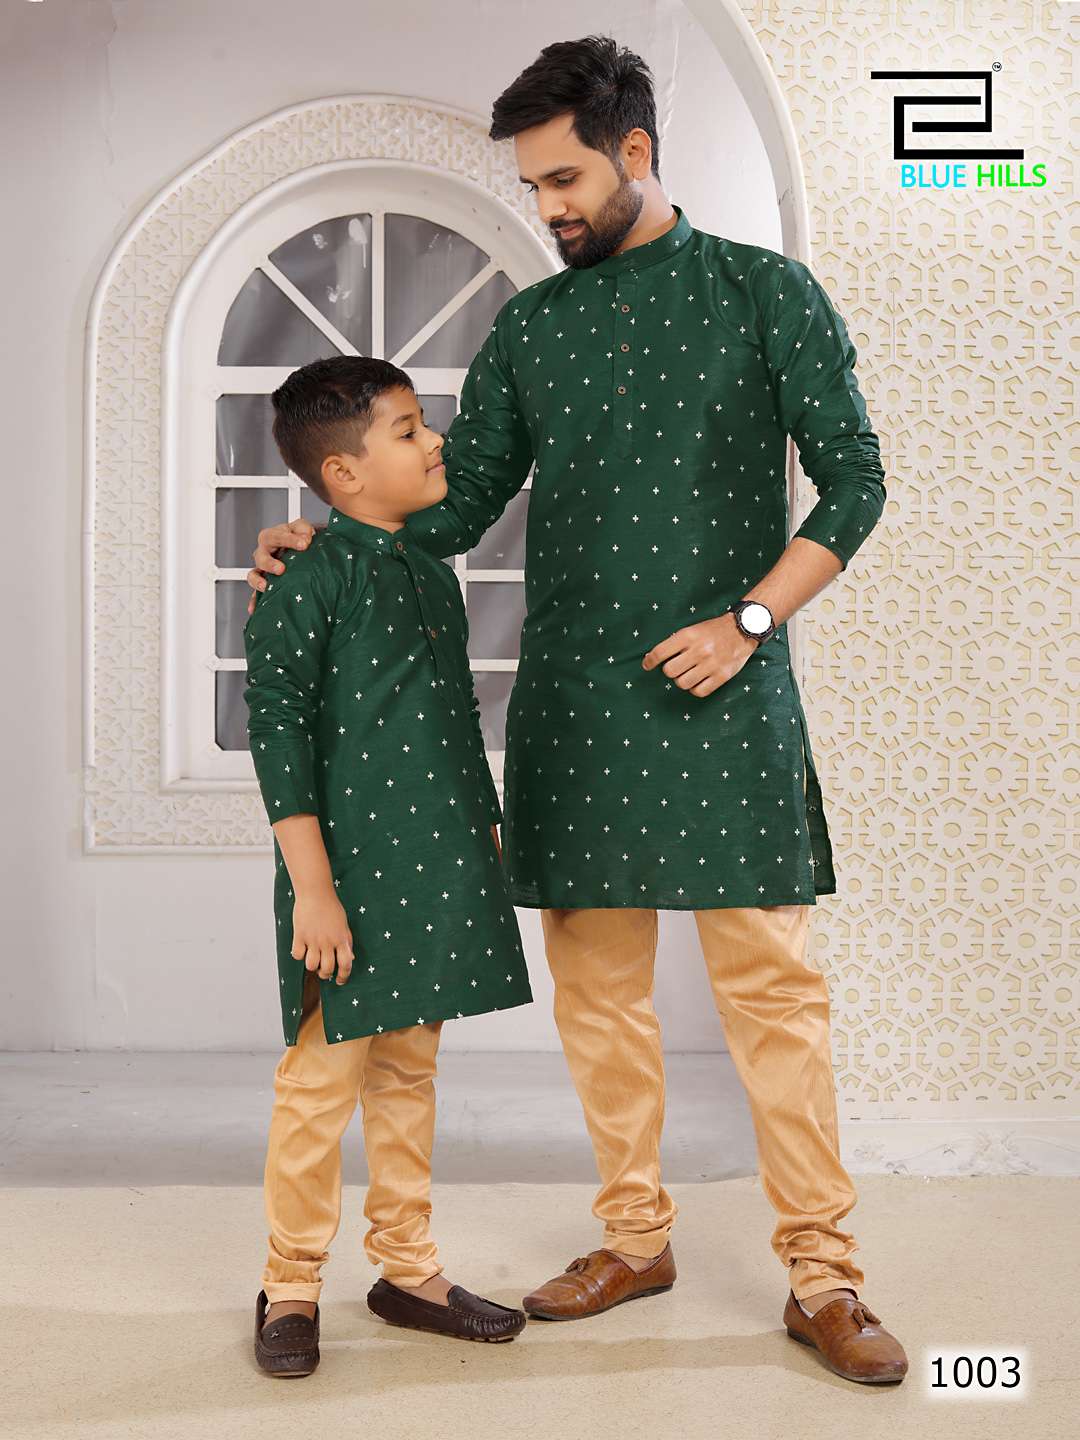 Golden Boys By Blue Hills 1001 To 1005 Series Beautiful Colorful Stylish Fancy Casual Wear & Ethnic Wear & Ready To Wear Silk Jacquard Kurtas At Wholesale Price